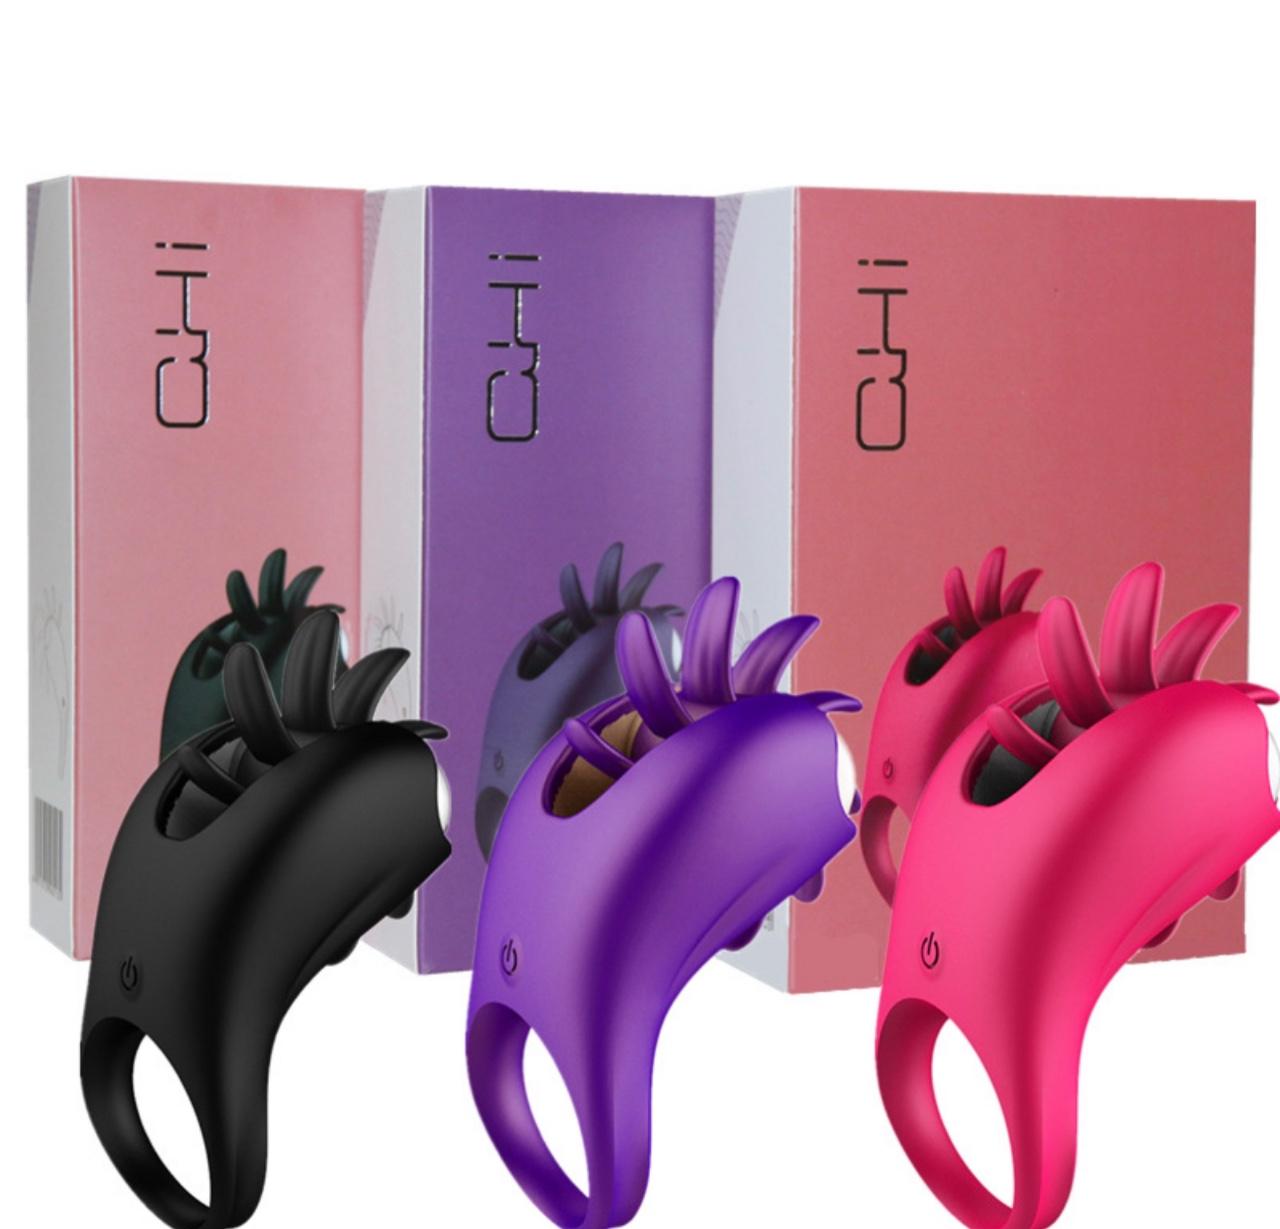 10 Speeds Time Delay Vibrating Cock Ring With Massager Brush Silicone Sex Toys Quiet Usb Charged Penis Rings Vibrator